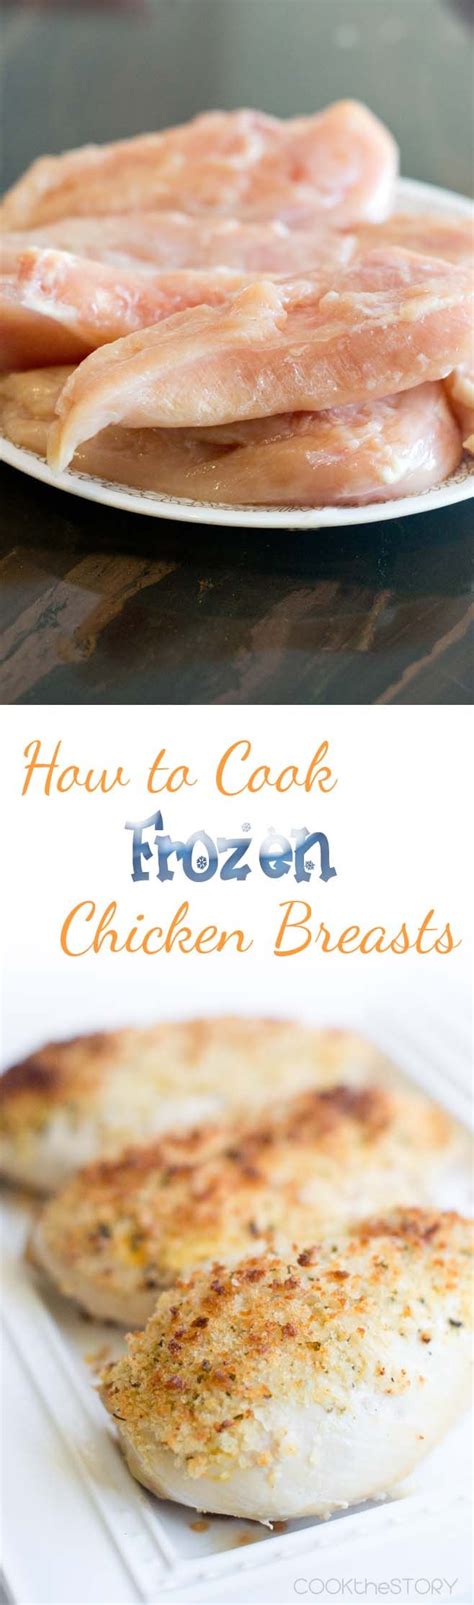 Ohmygoshthisissogood baked chicken breast recipe! Breaded Frozen Chicken Breasts | Recipe | Mustard, Frozen and How to cook chicken